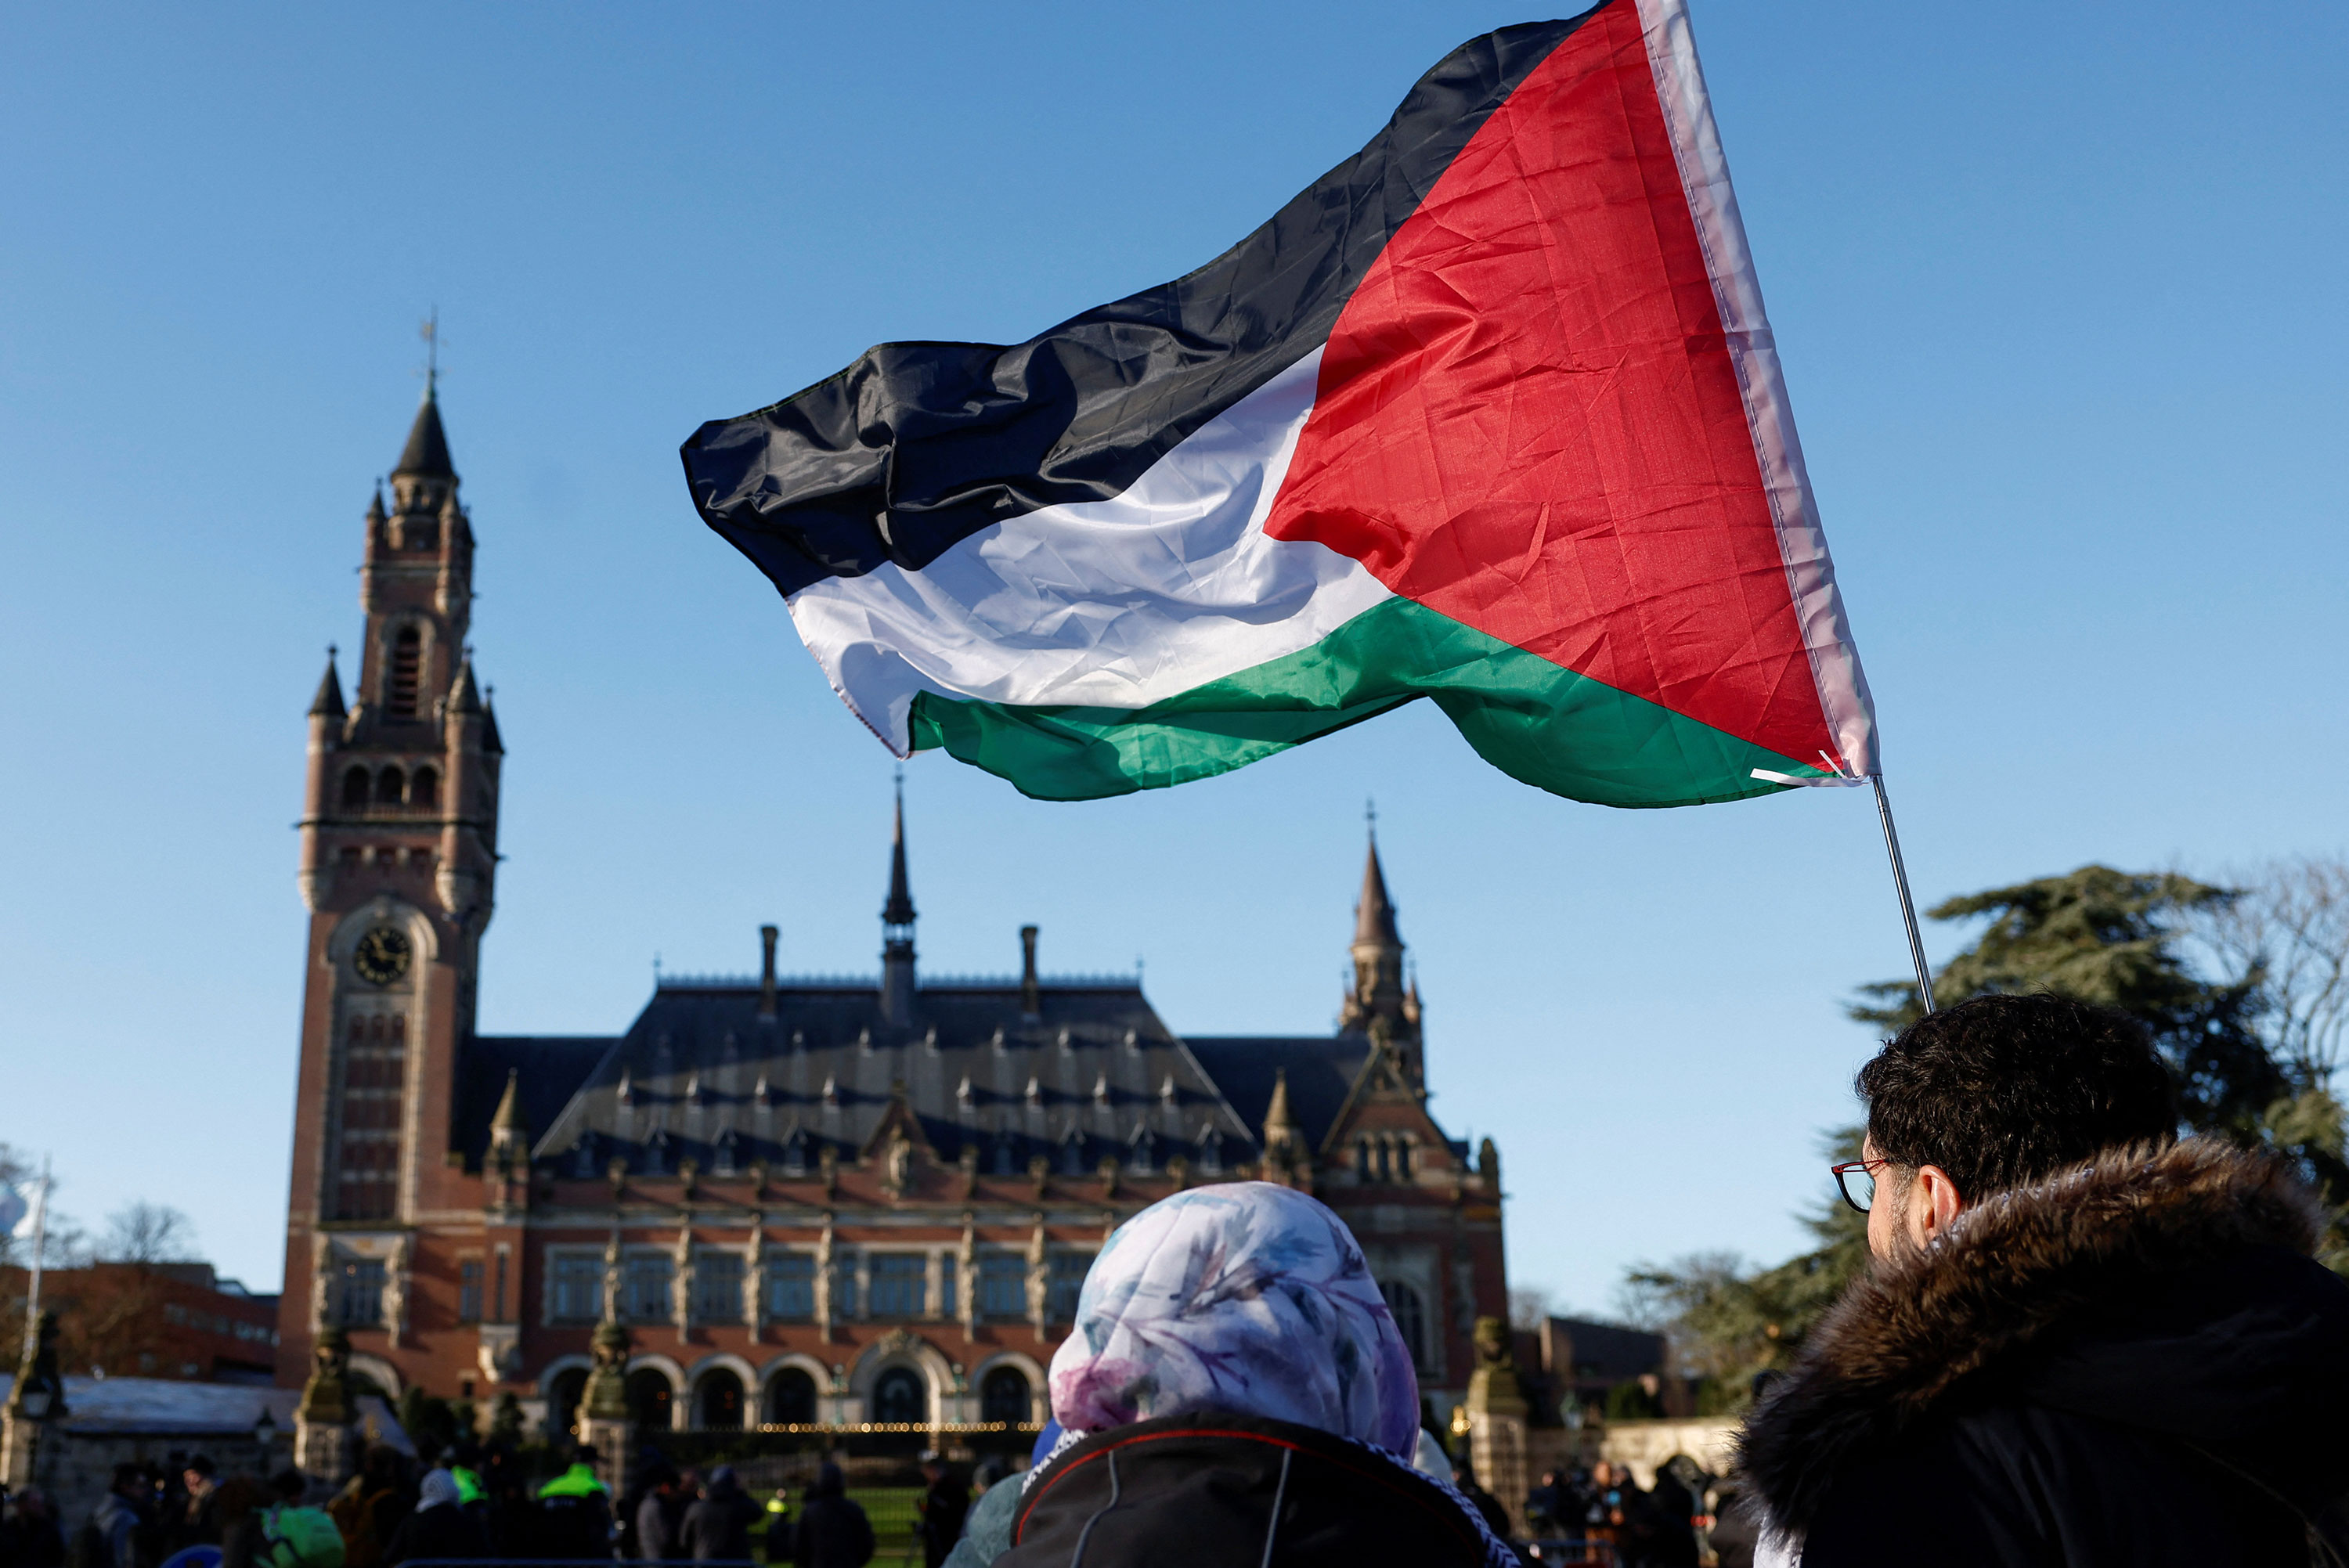 Protesters hold a Palestinian flag outside the International Court of Justice in The Hague, Netherlands, on Friday.